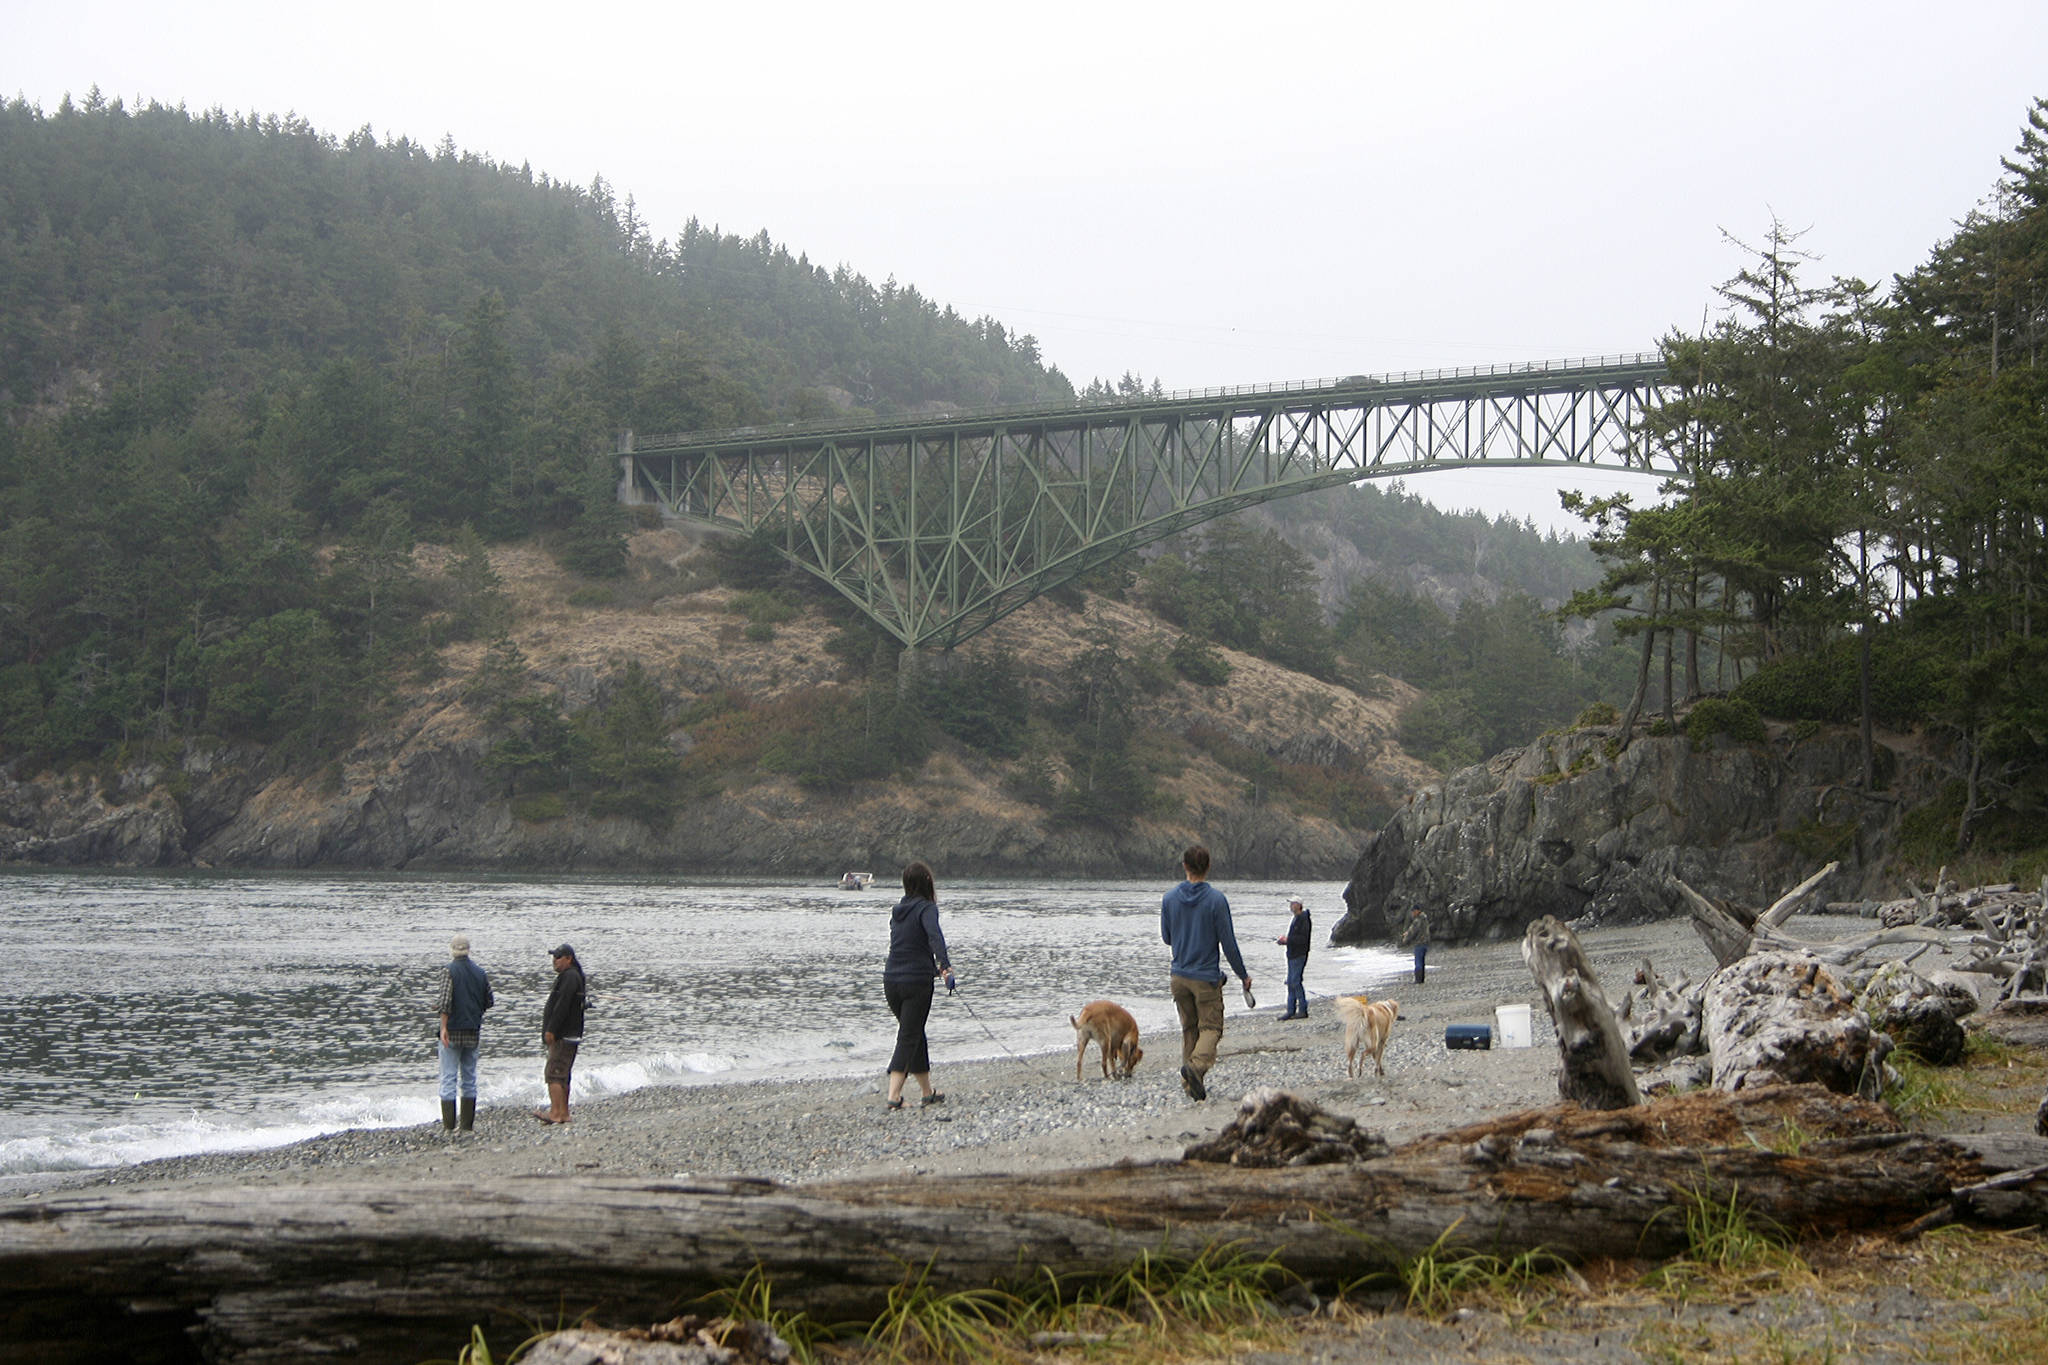 Deception Pass State Park. Deception Pass is a strait separating Whidbey Island from Fidalgo Island. File photo